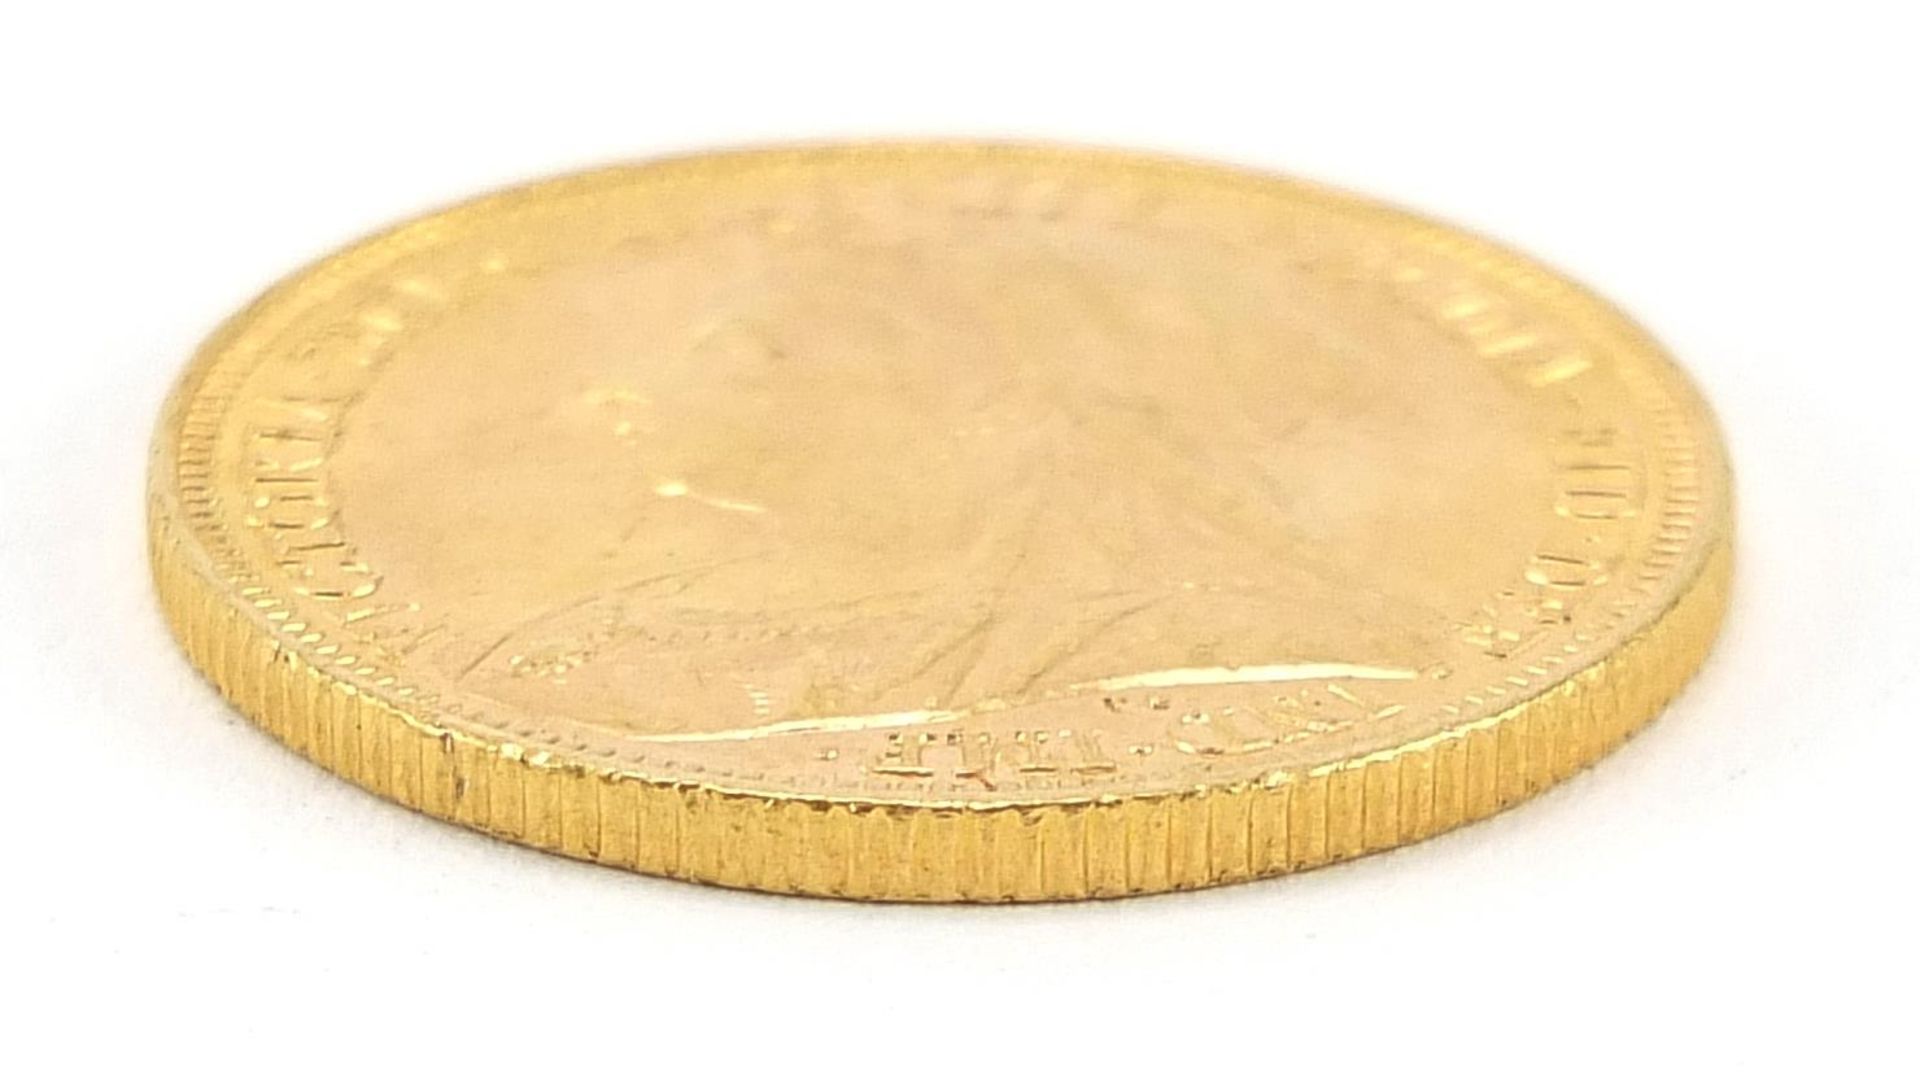 Queen Victoria 1895 gold sovereign, Sydney mint - this lot is sold without buyer's premium - Image 3 of 3